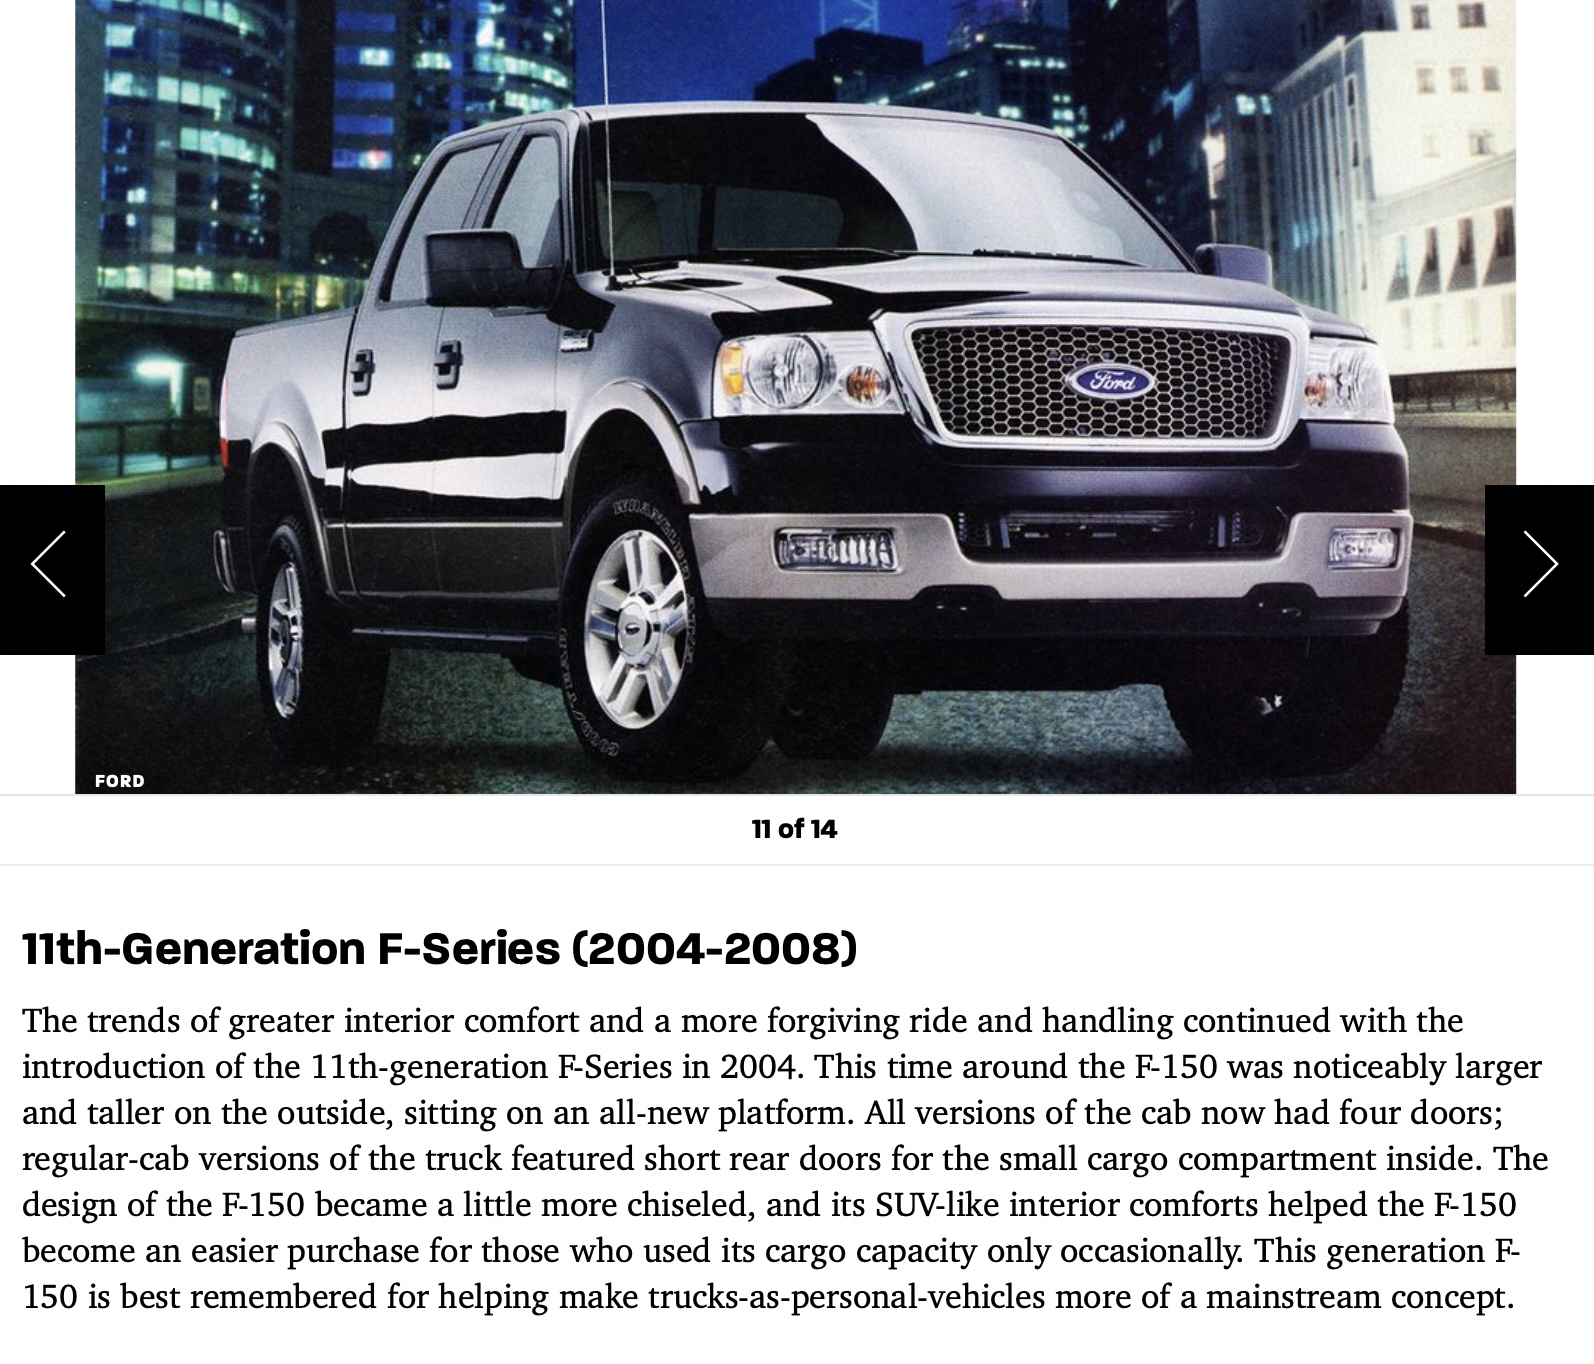 Ford F-150 Ford F-Series Trucks: A Quick Visual Guide to All 14 Generations Screen Shot 2021-06-17 at 9.05.45 AM